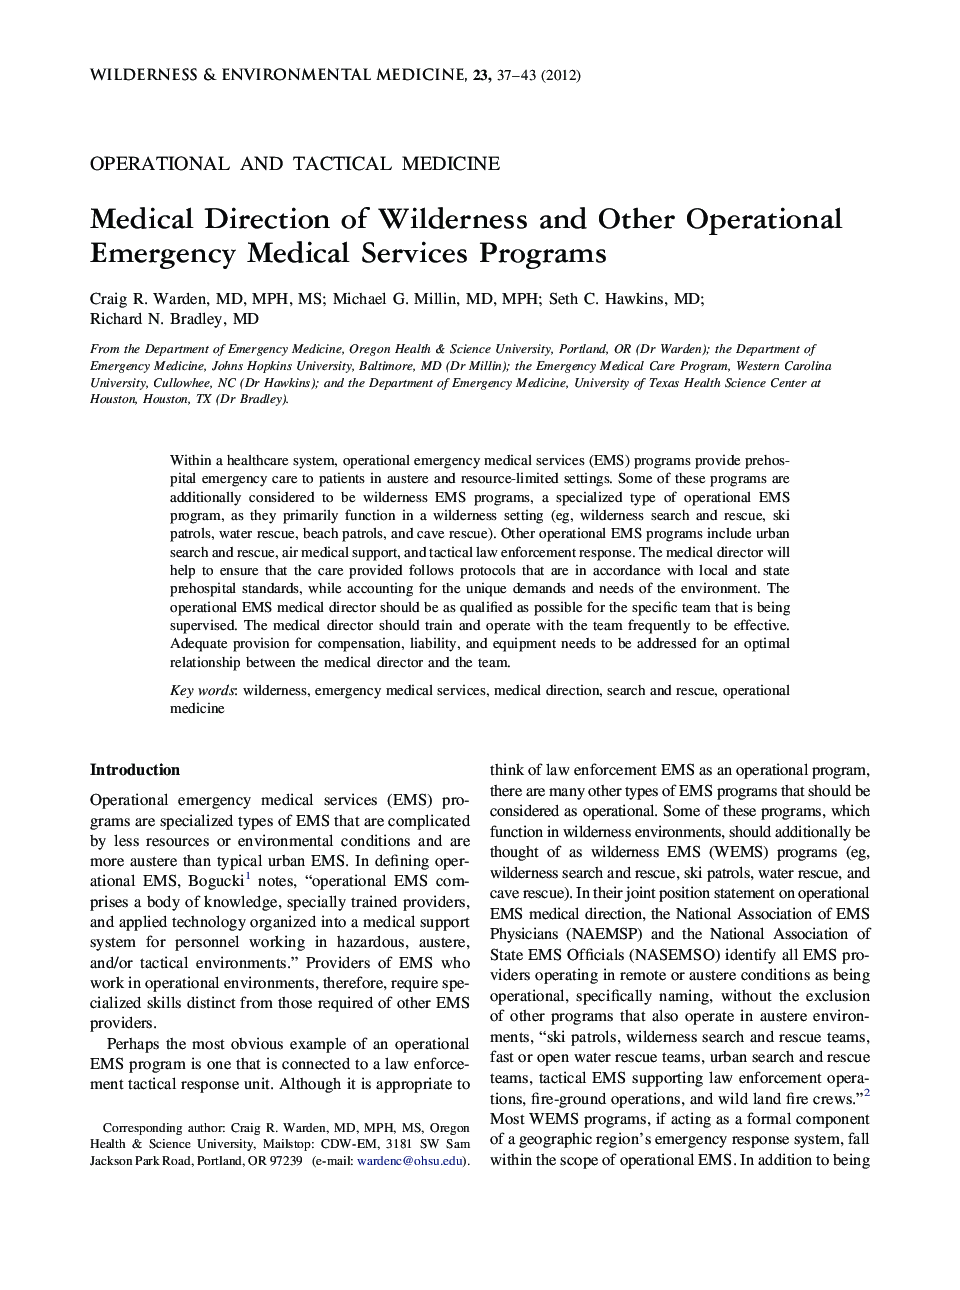 Medical Direction of Wilderness and Other Operational Emergency Medical Services Programs